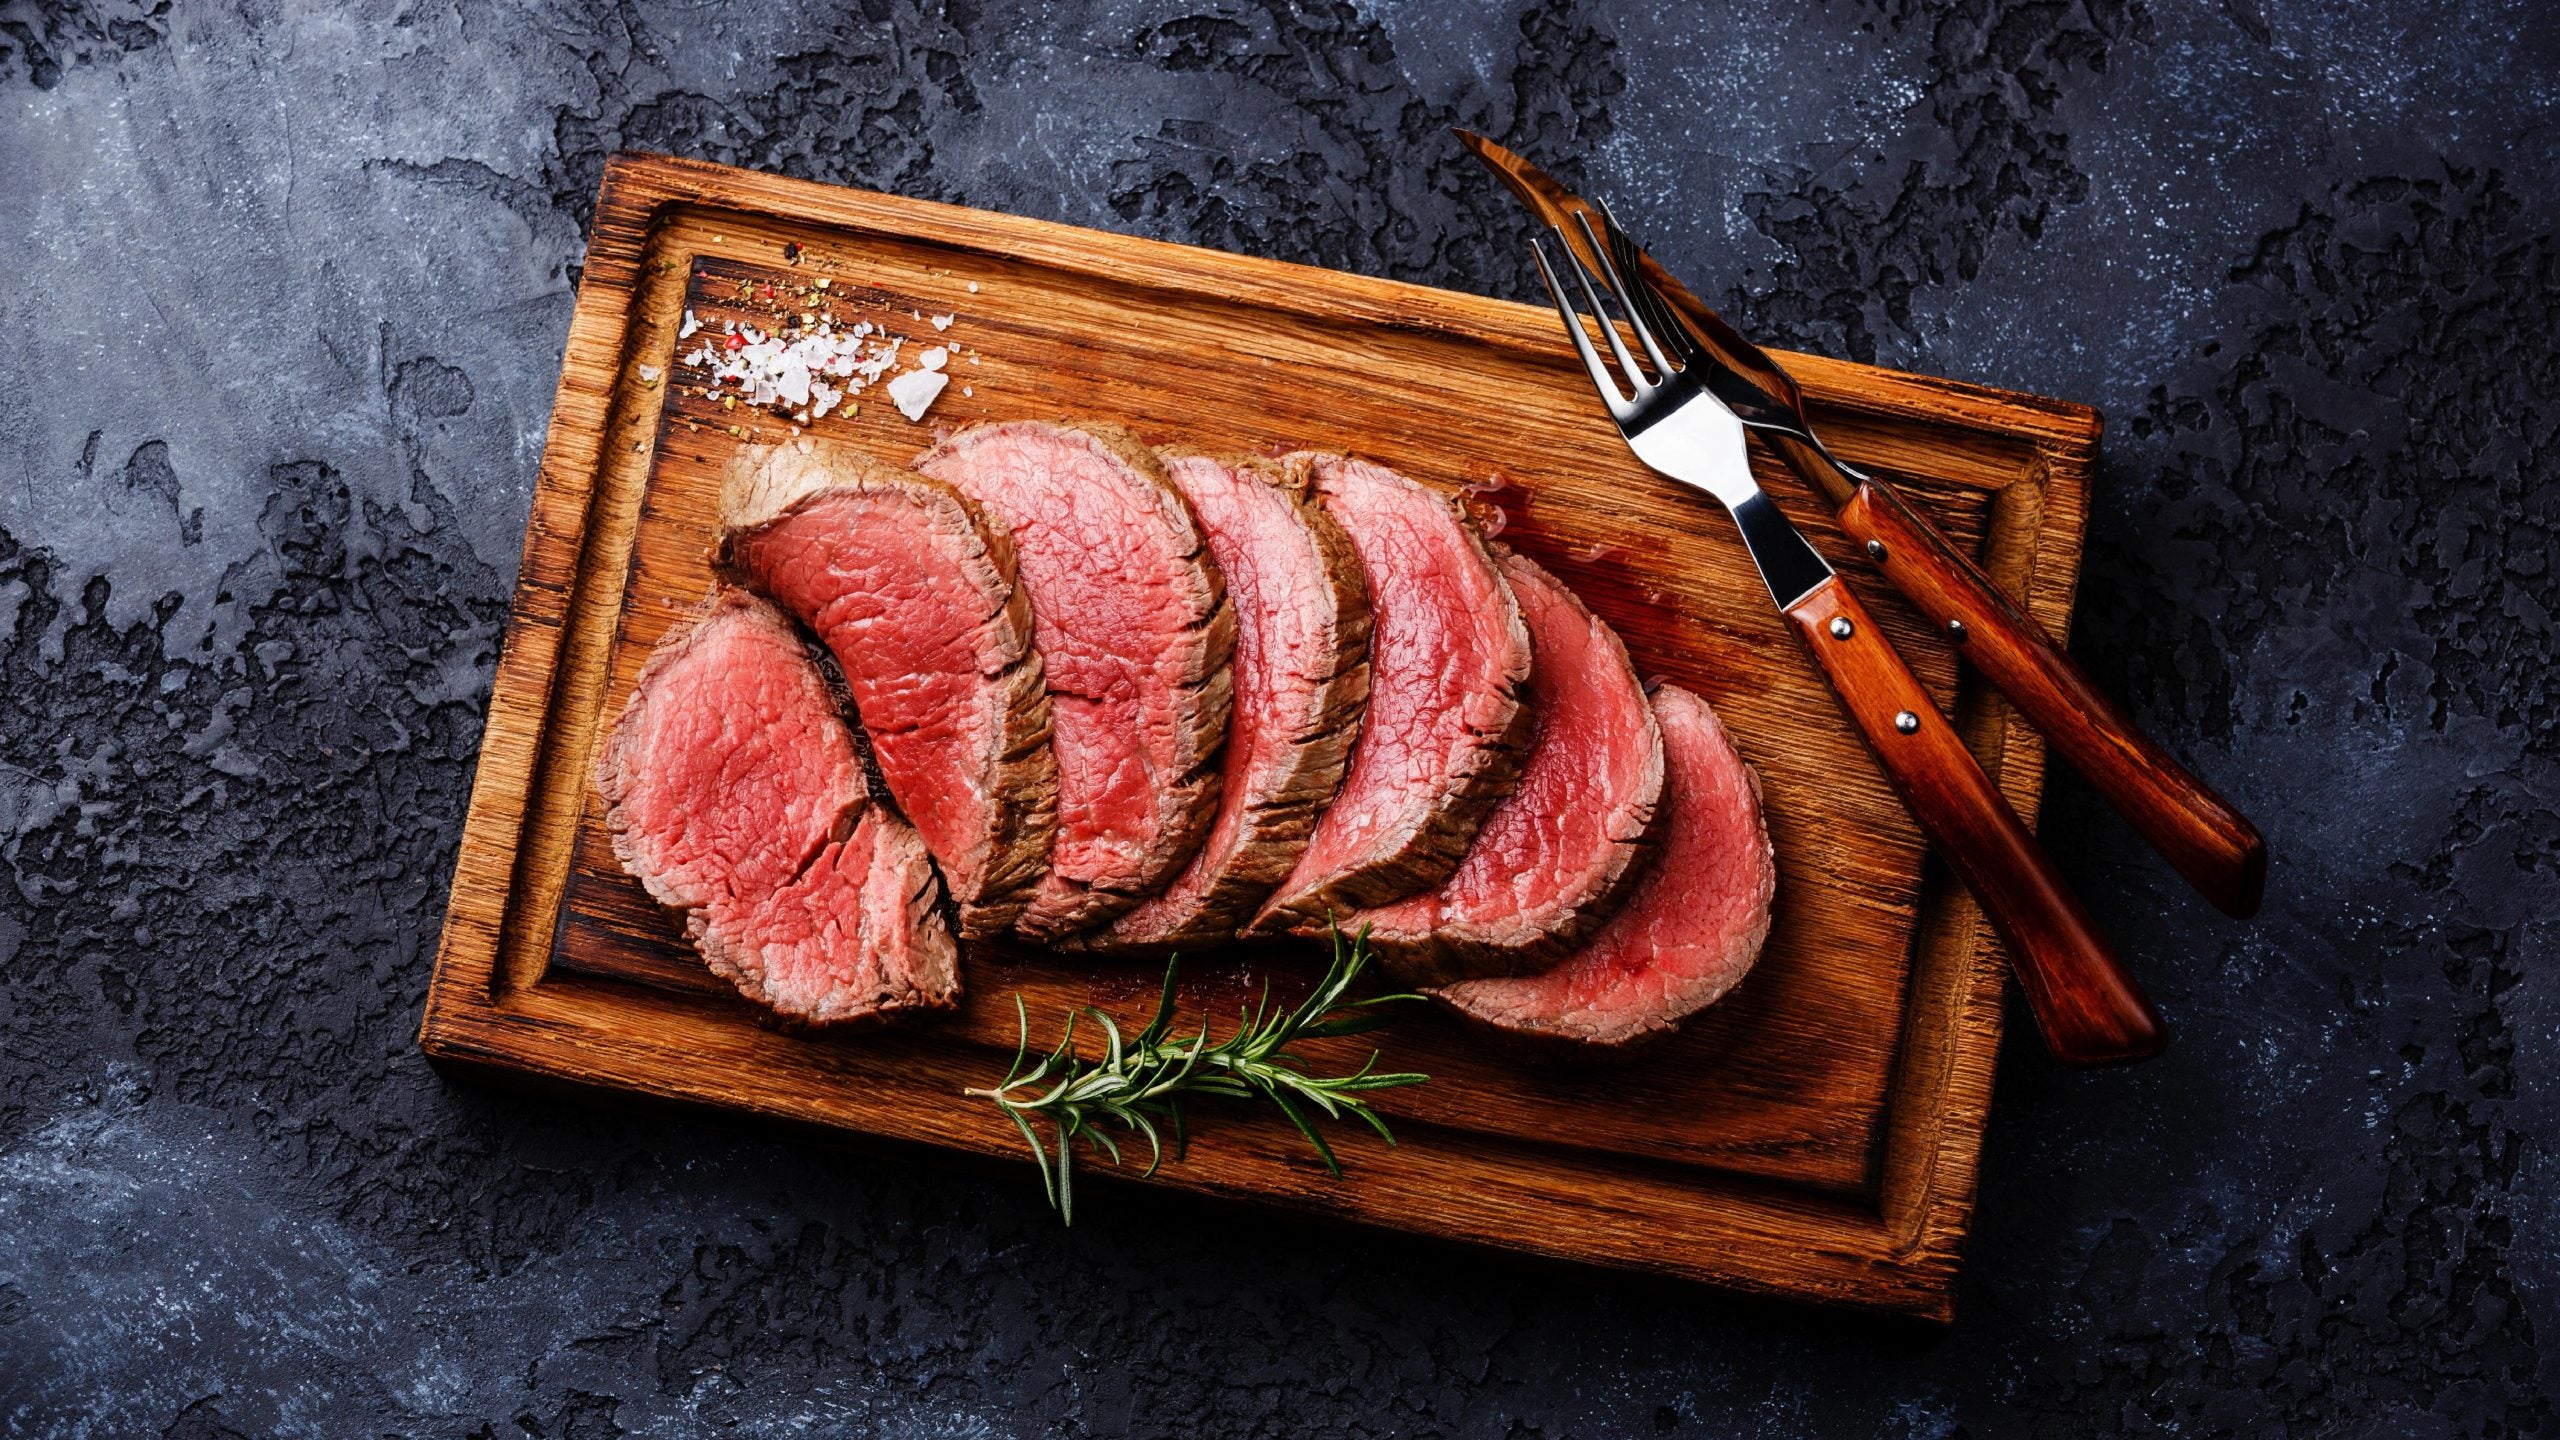 Our Top 5 Meats For Thanksgiving - Whole Bison Tenderloin Roast - Beck & Bulow